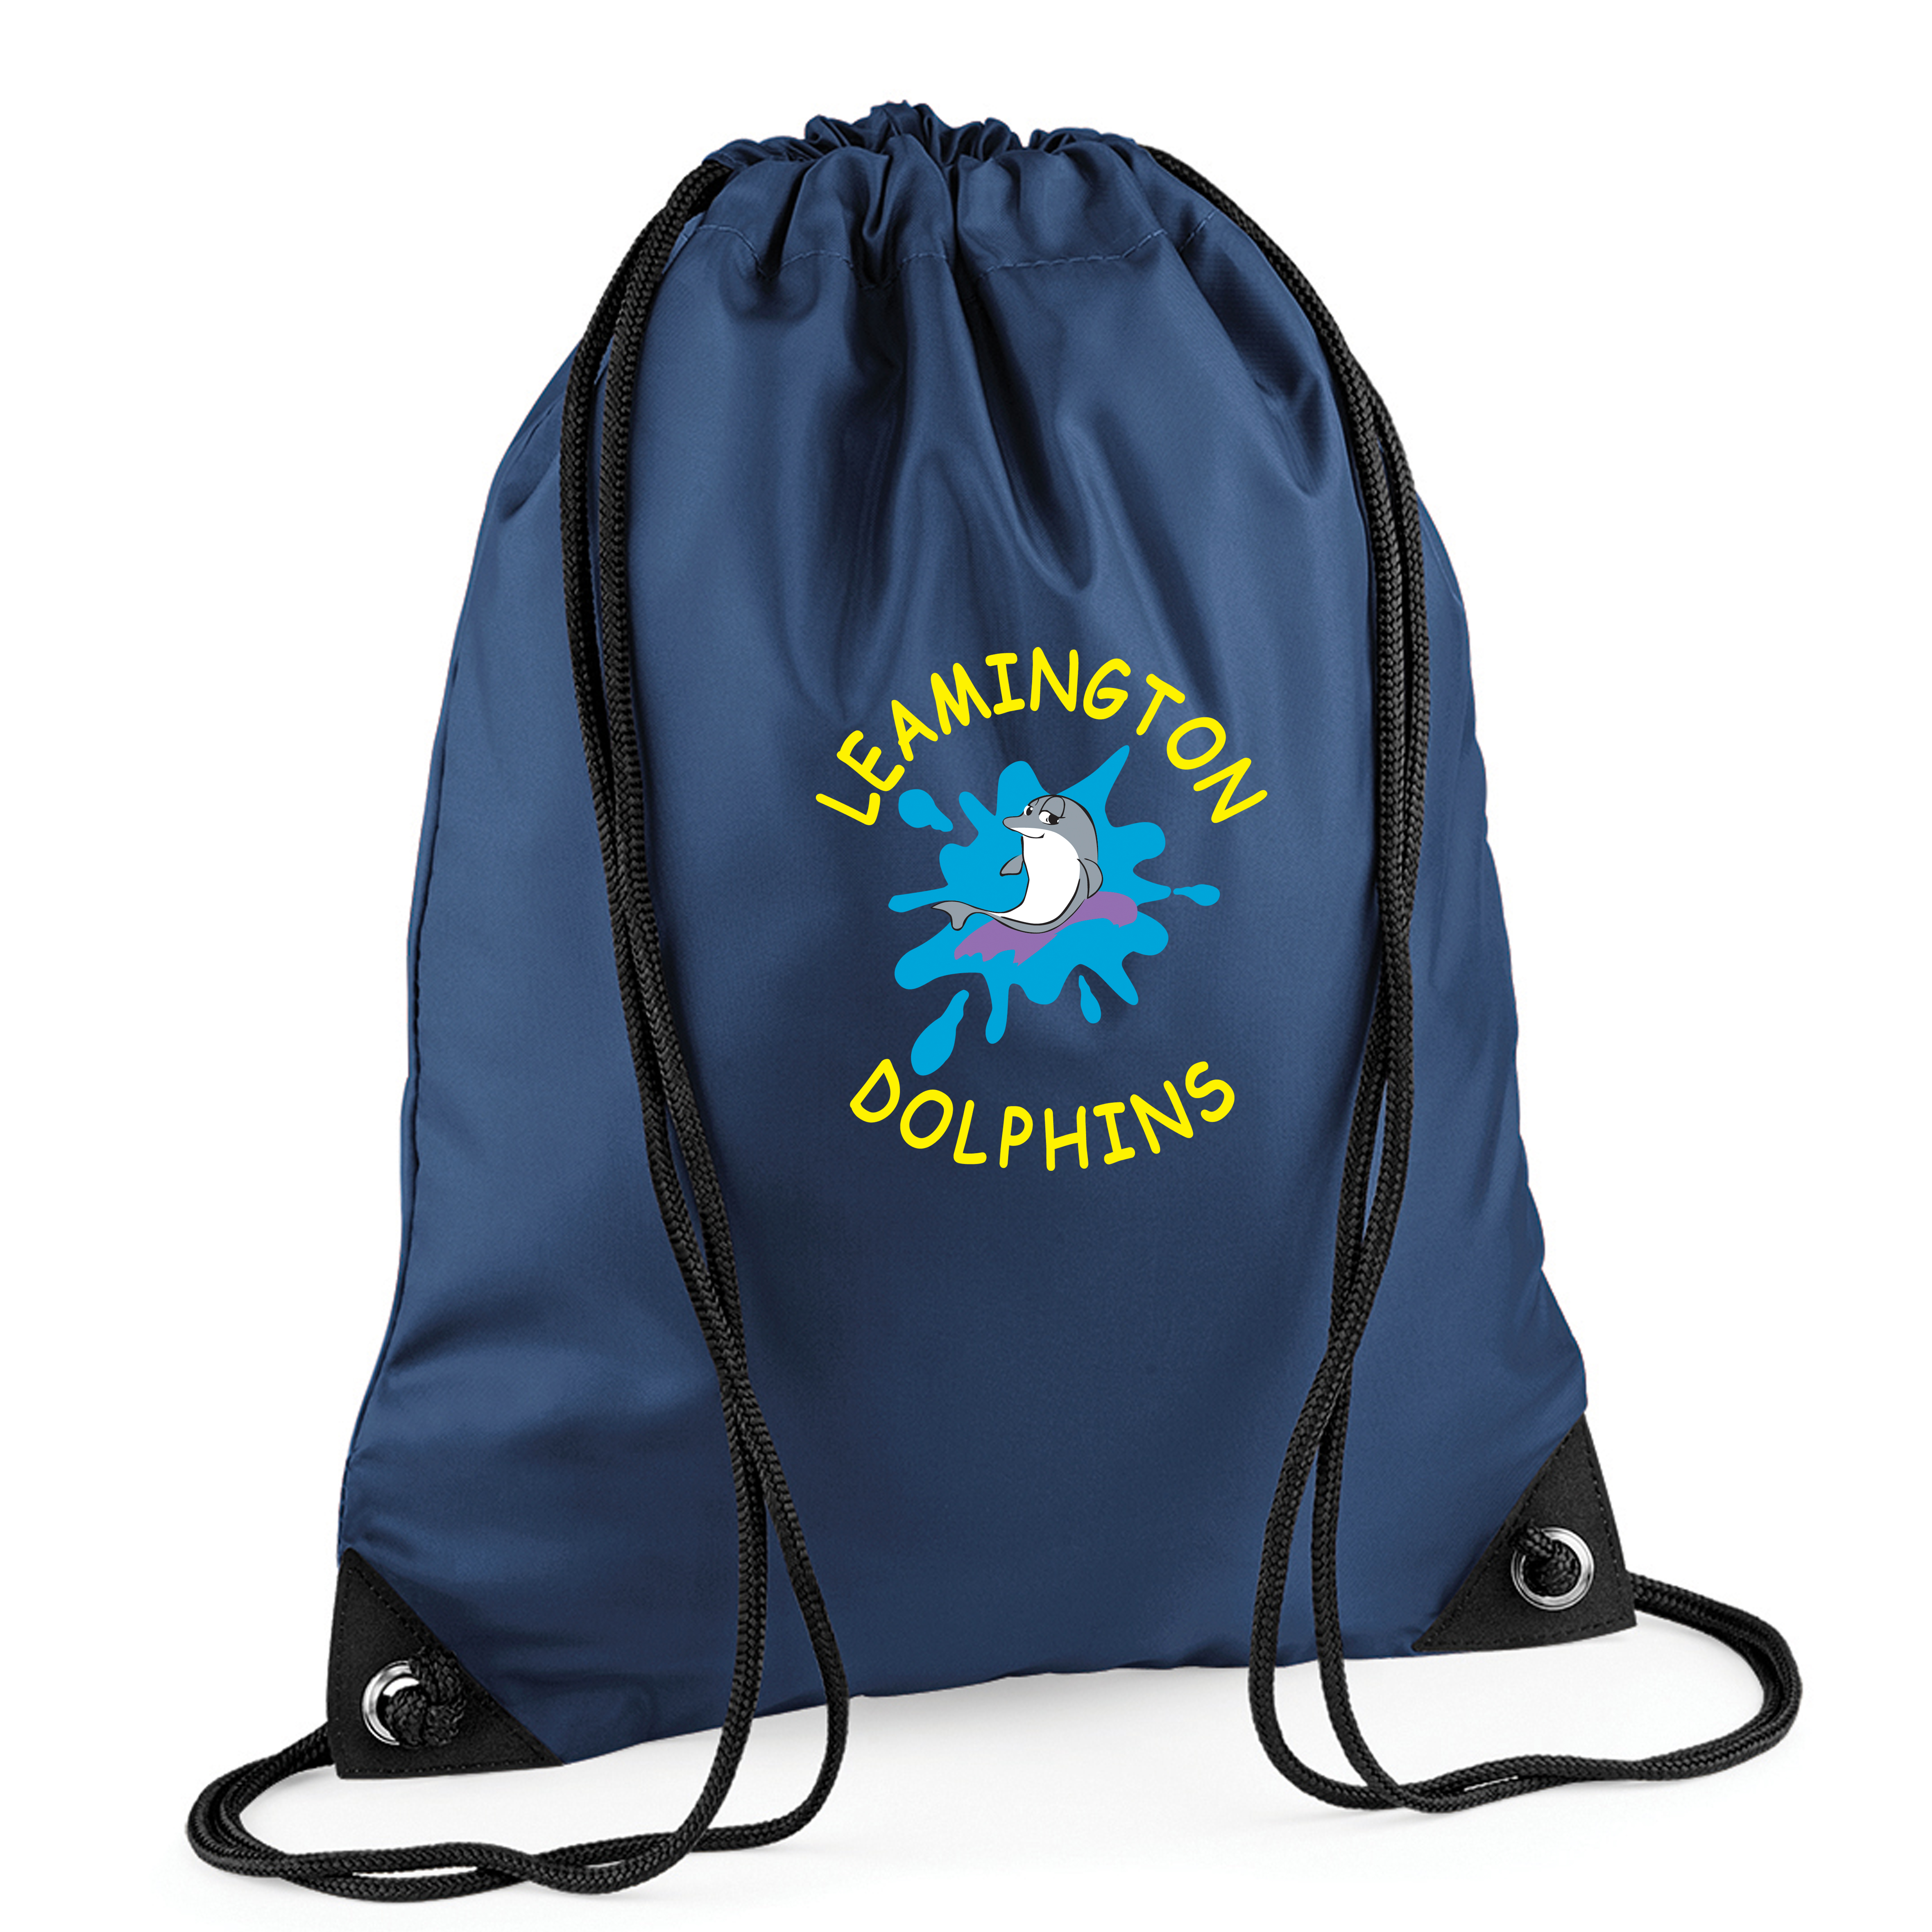 Dolphins Gymsack